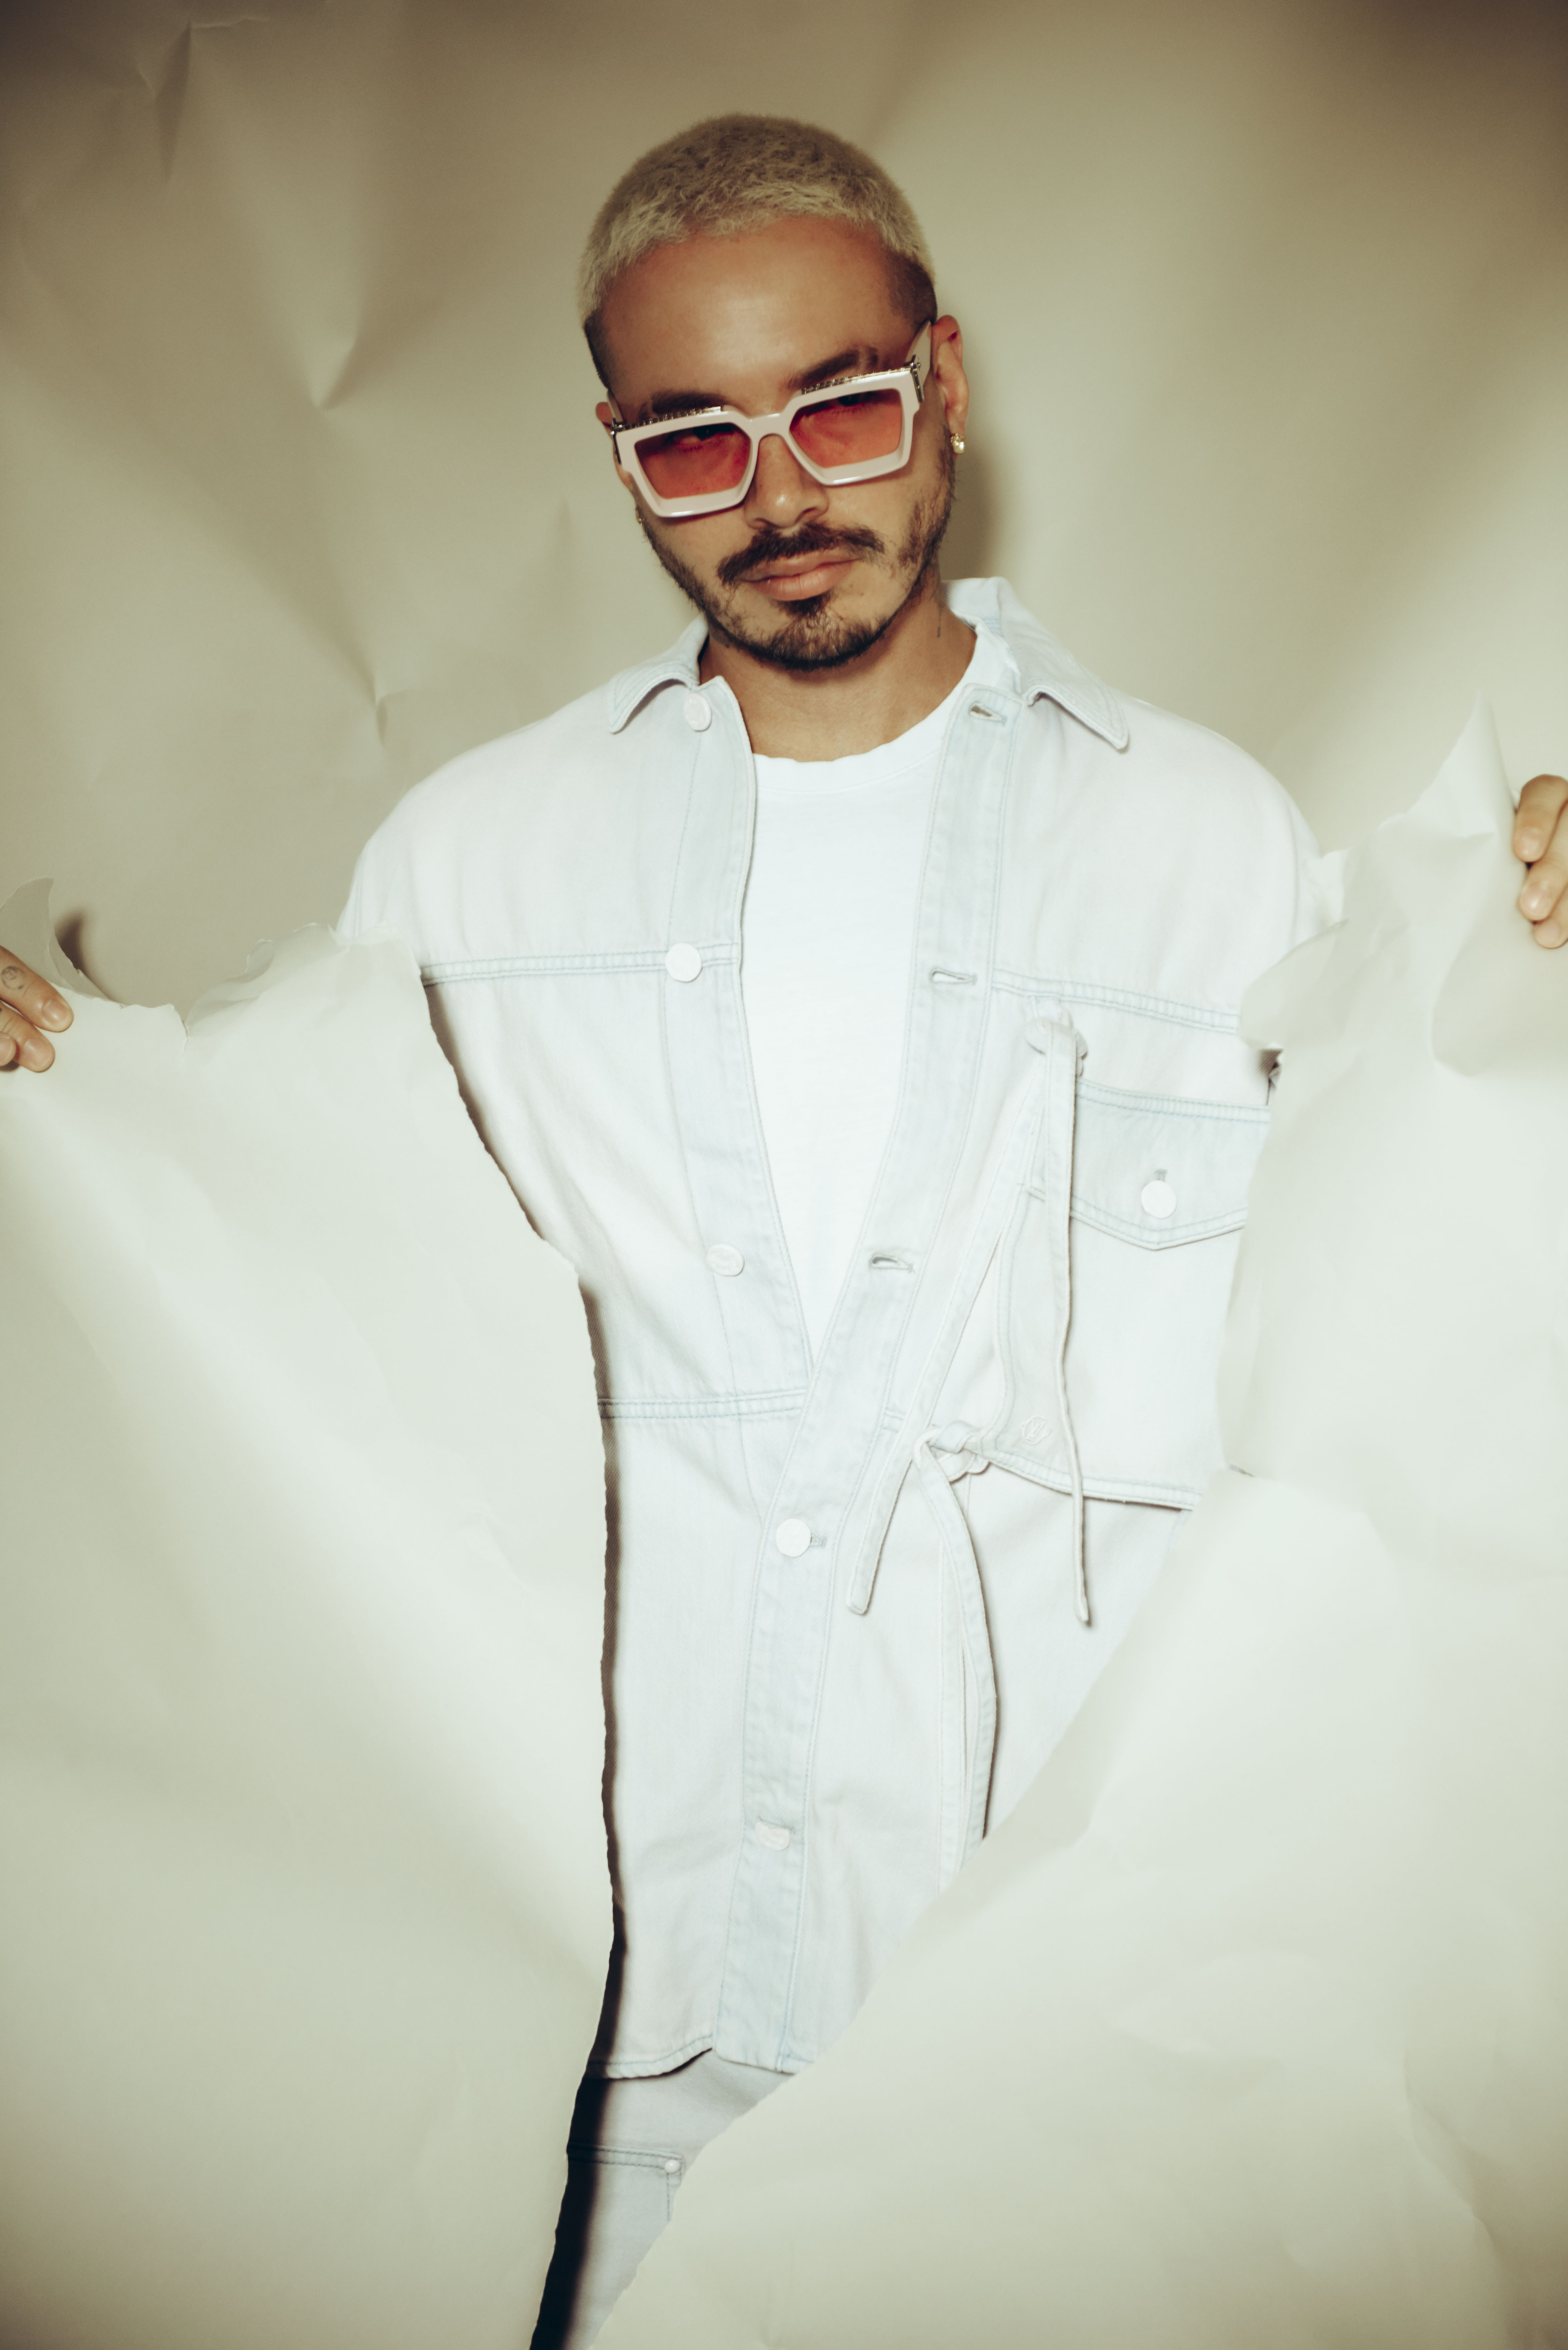 On 'JOSE,' J Balvin Made the Music He Wants To Listen To